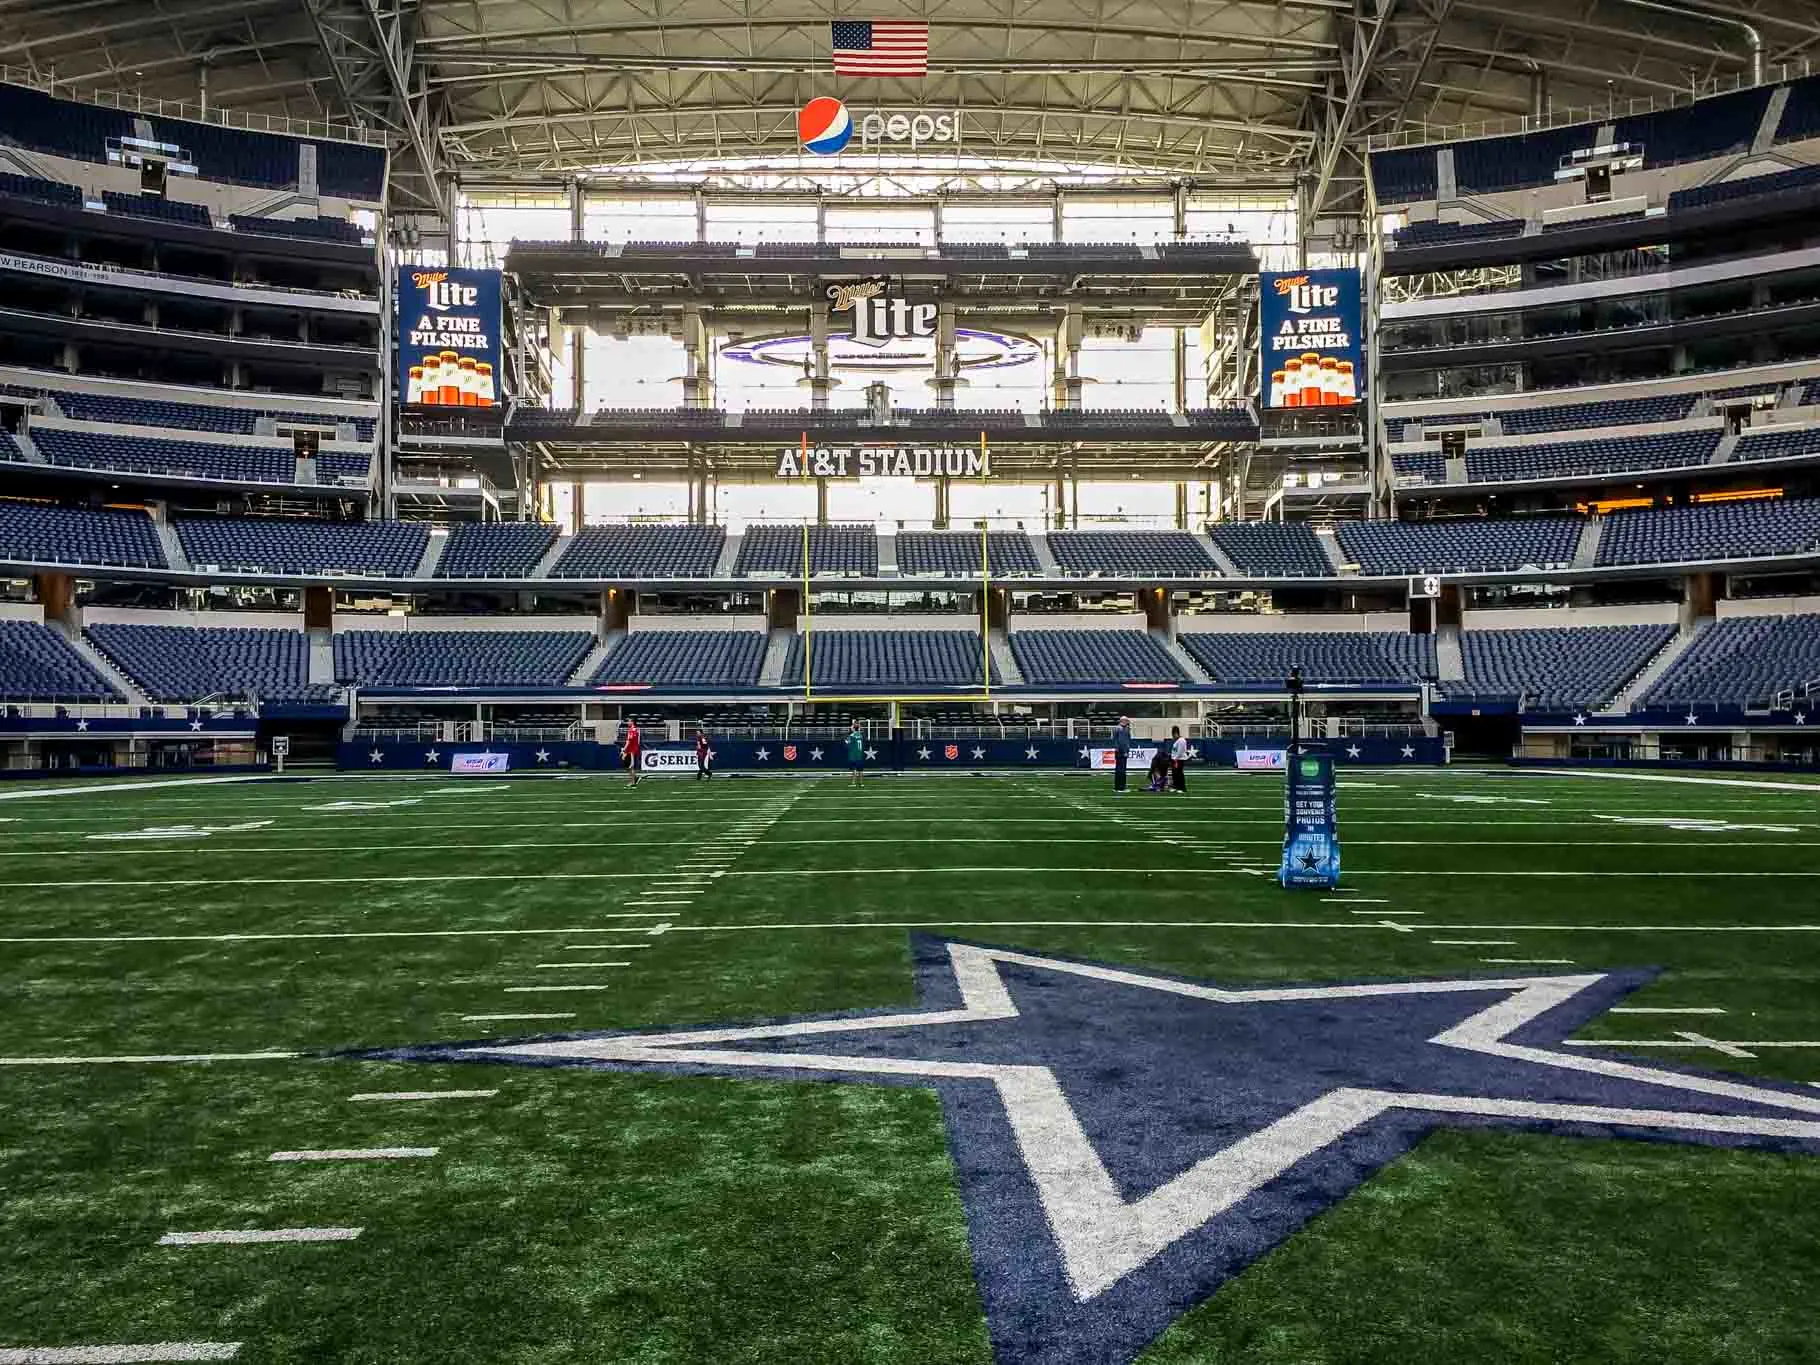 View from the field of a large football stadium with a blue and silver star.